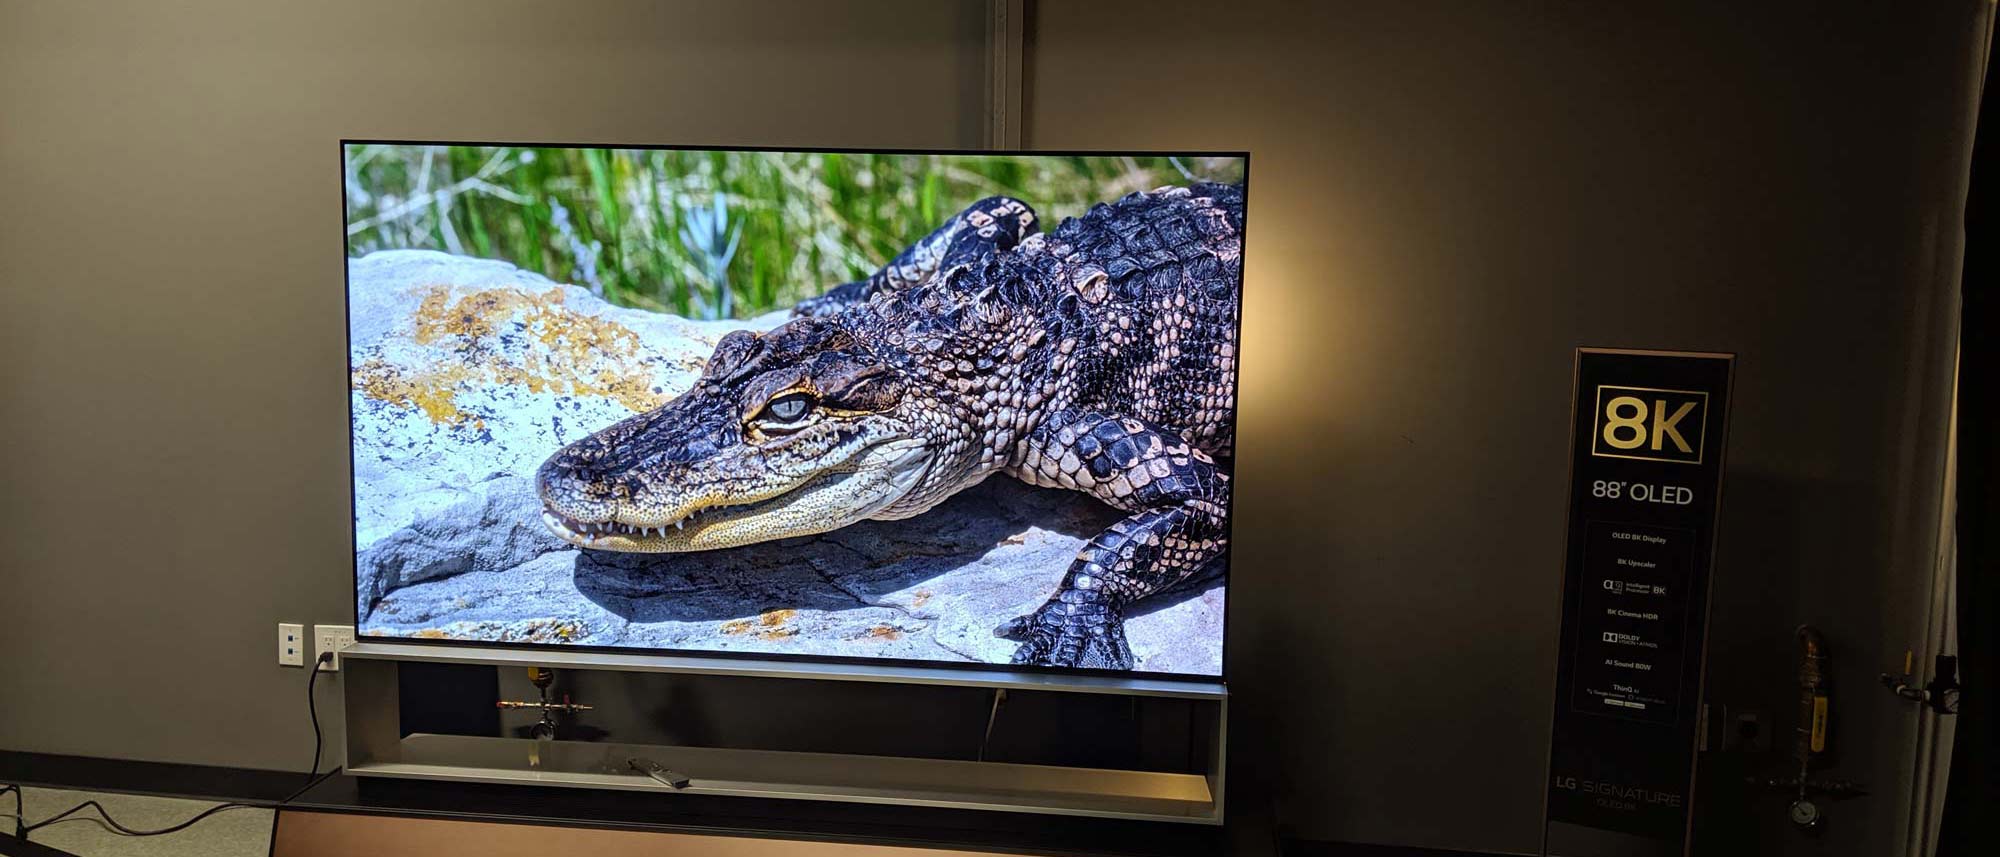 LG Z9 88-inch 8K OLED TV Review: Hands-on | Tom's Guide